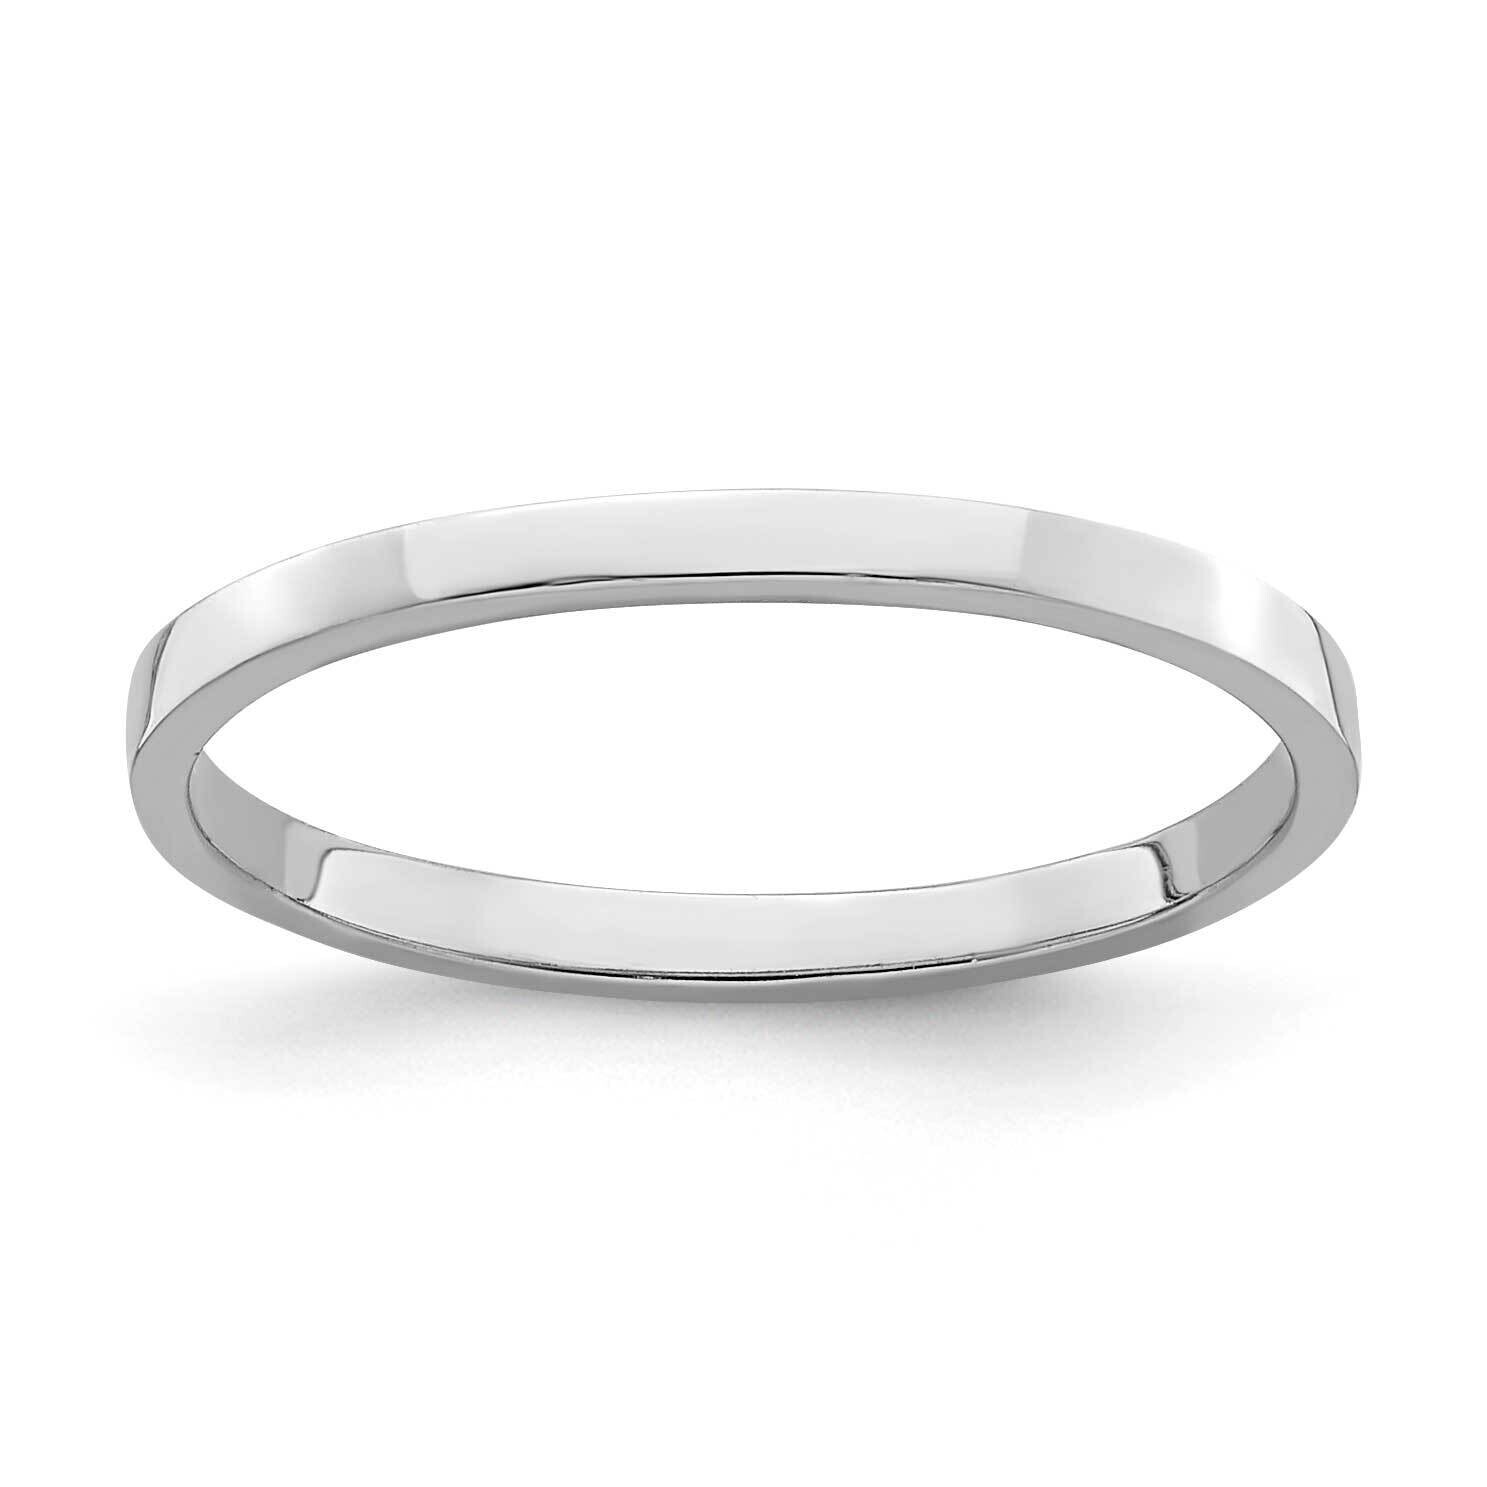 Polished Childs Ring 10k White Gold 10R535W